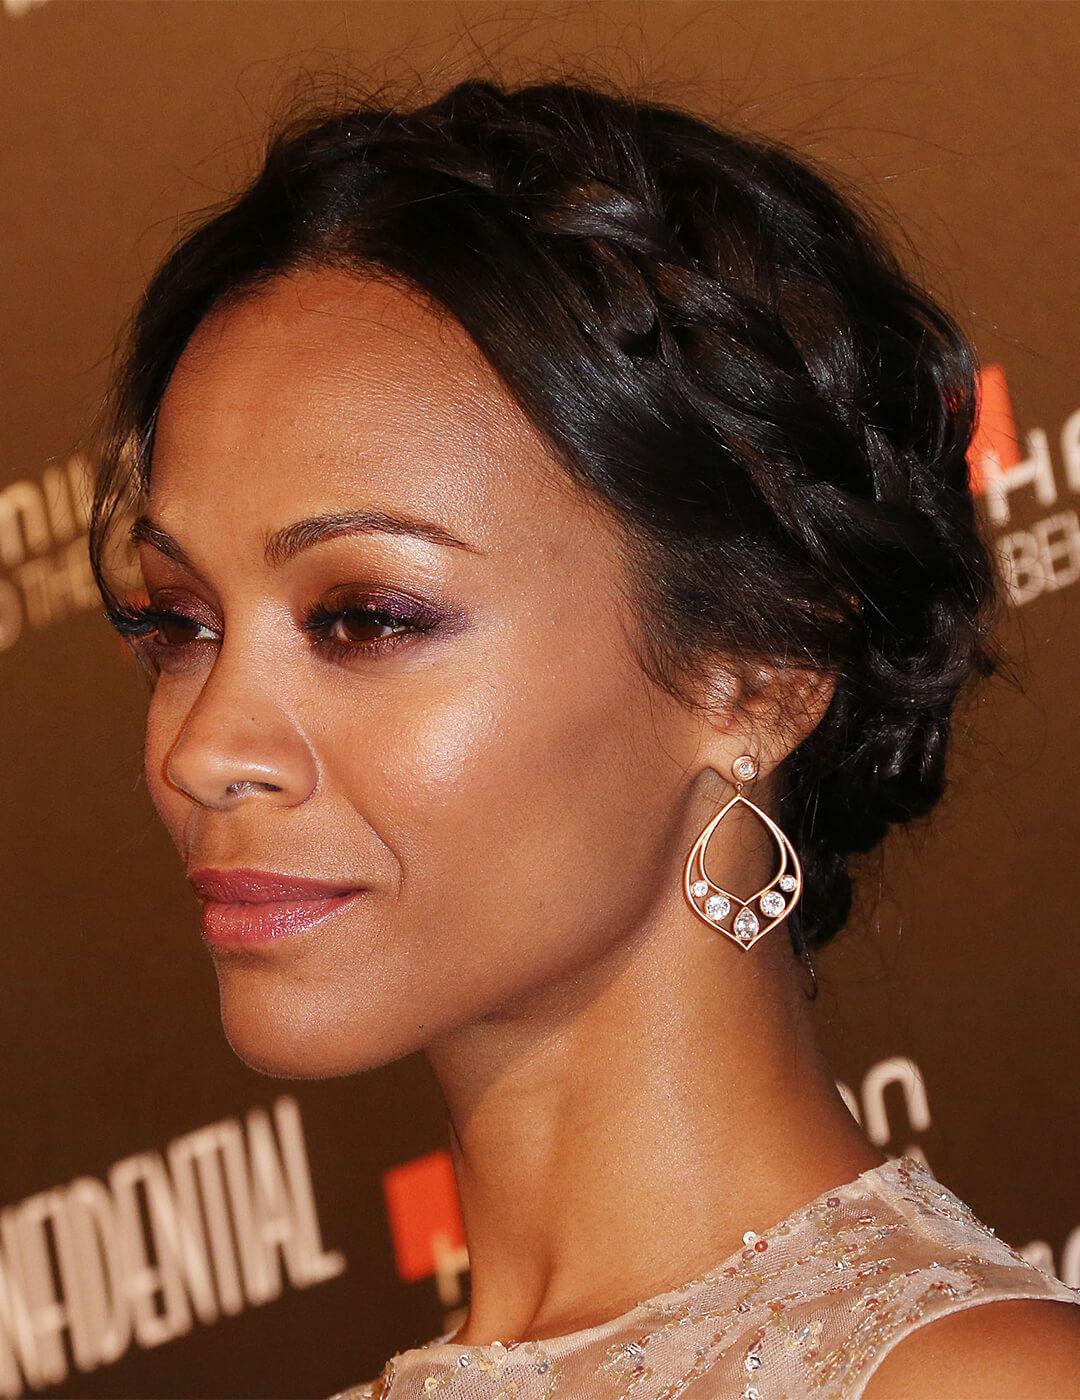 Close-up of Zoe Saldana rocking a smoky eyeshadow makeup look and crown braided hairstyle